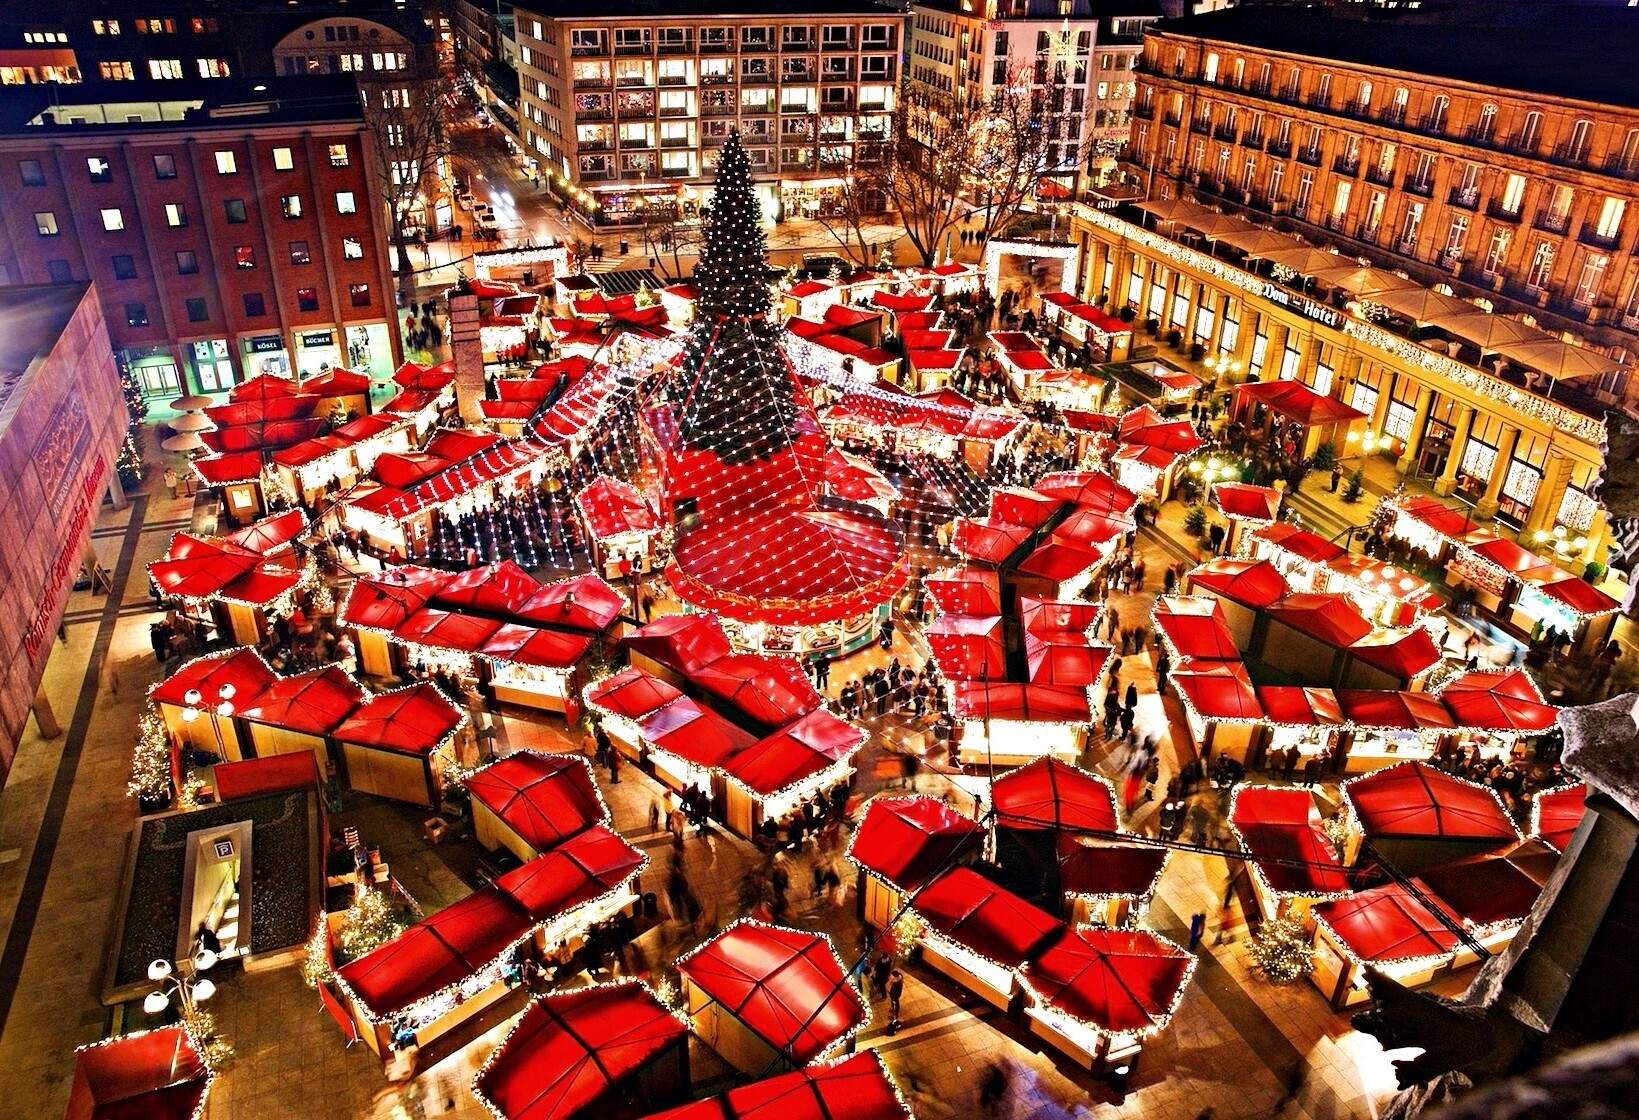 Aerial view of a market with a tall illuminated Christmas tree in the centre surrounded by stalls with red roofs.